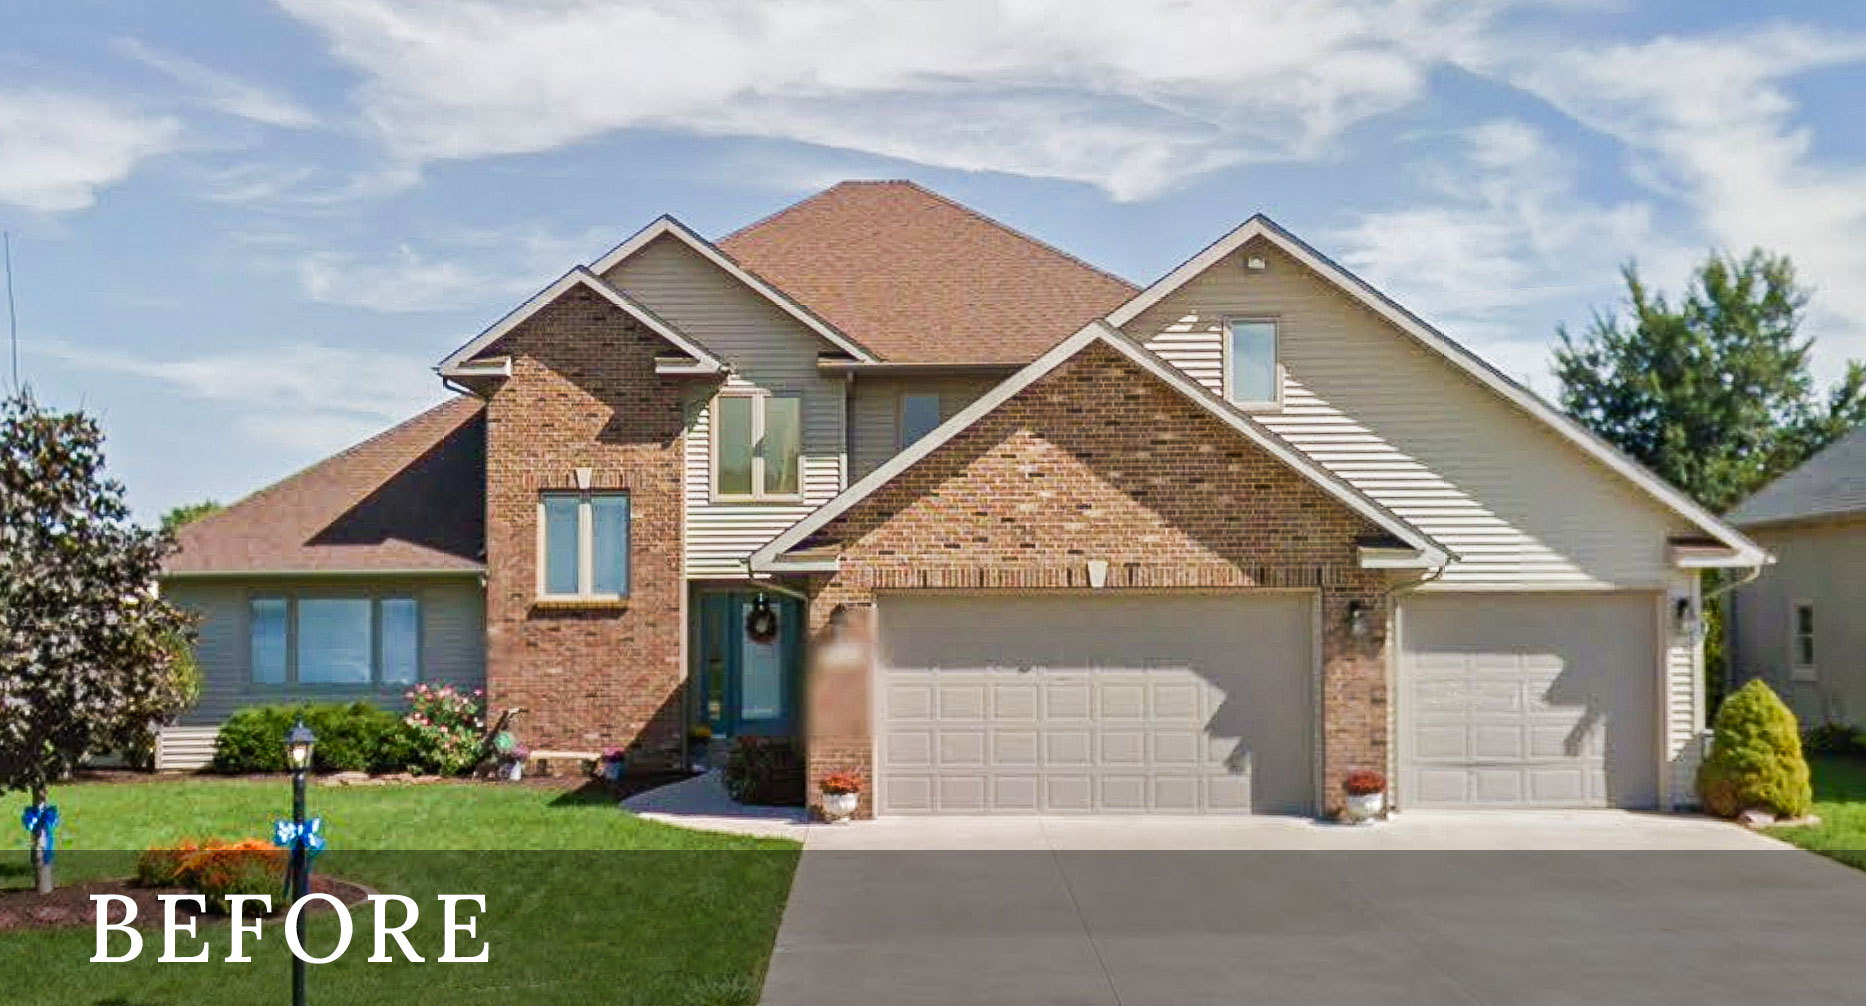 Shawluxe exterior home paint Chicago area